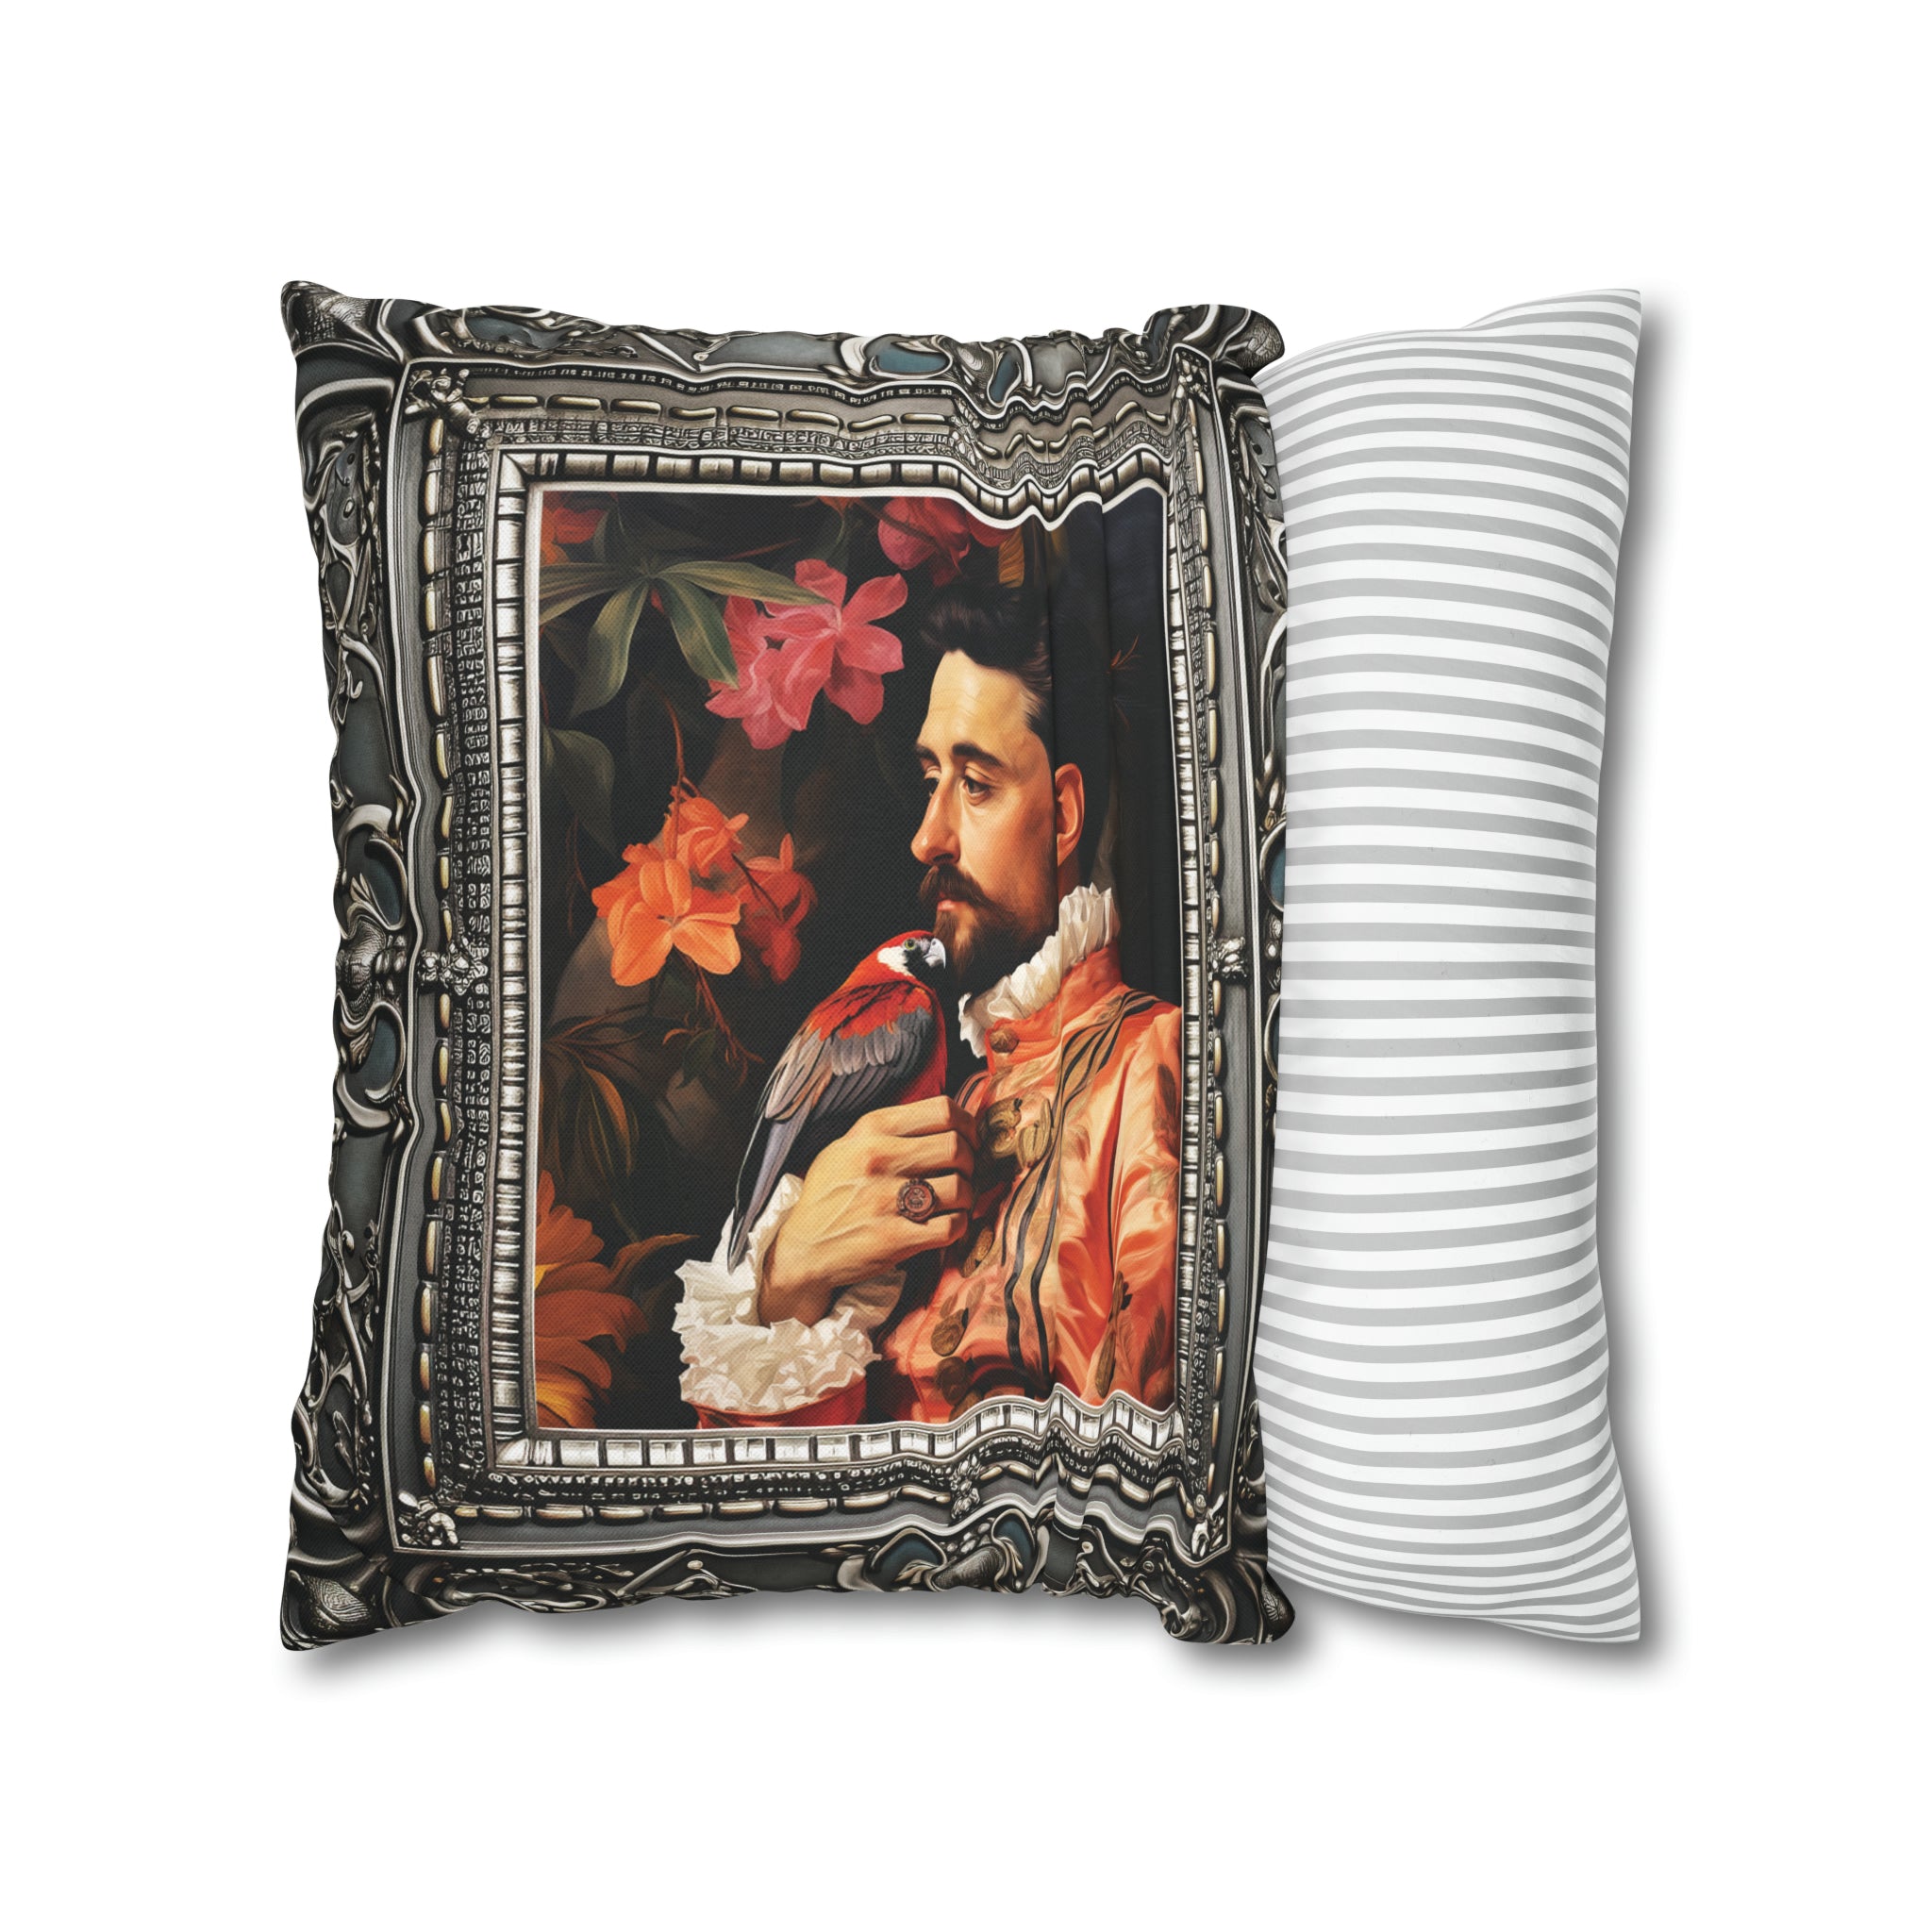 Square Pillow Case 18" x 18", CASE ONLY, no pillow form, original Art ,Colorful, a painting of an Italian Aristocrat and his Bird, Antique Frame